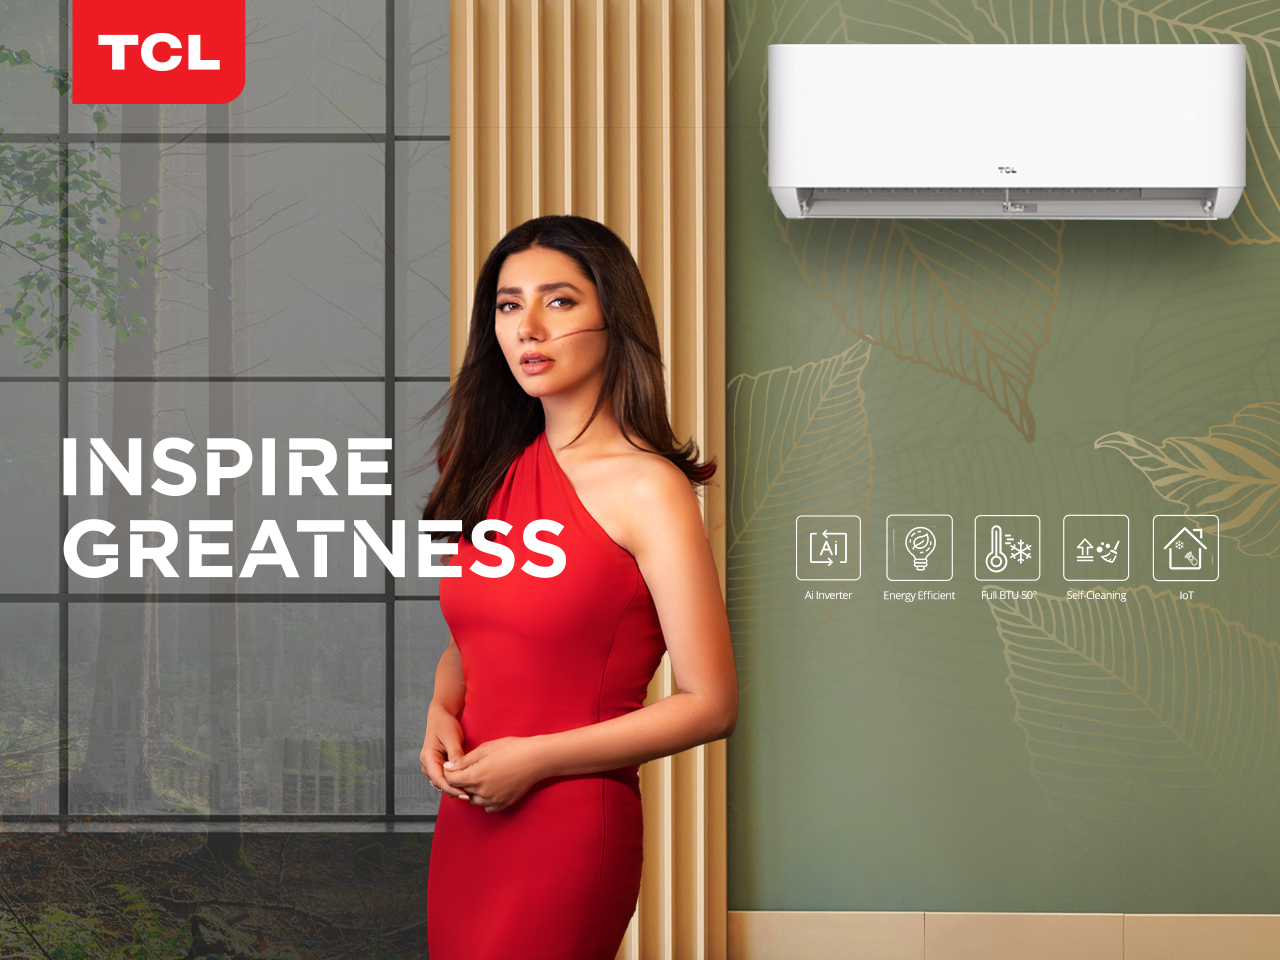 TCL Pakistan unveils T3 Pro DC Inverter AC in the latest Commercial featuring Mahira Khan 